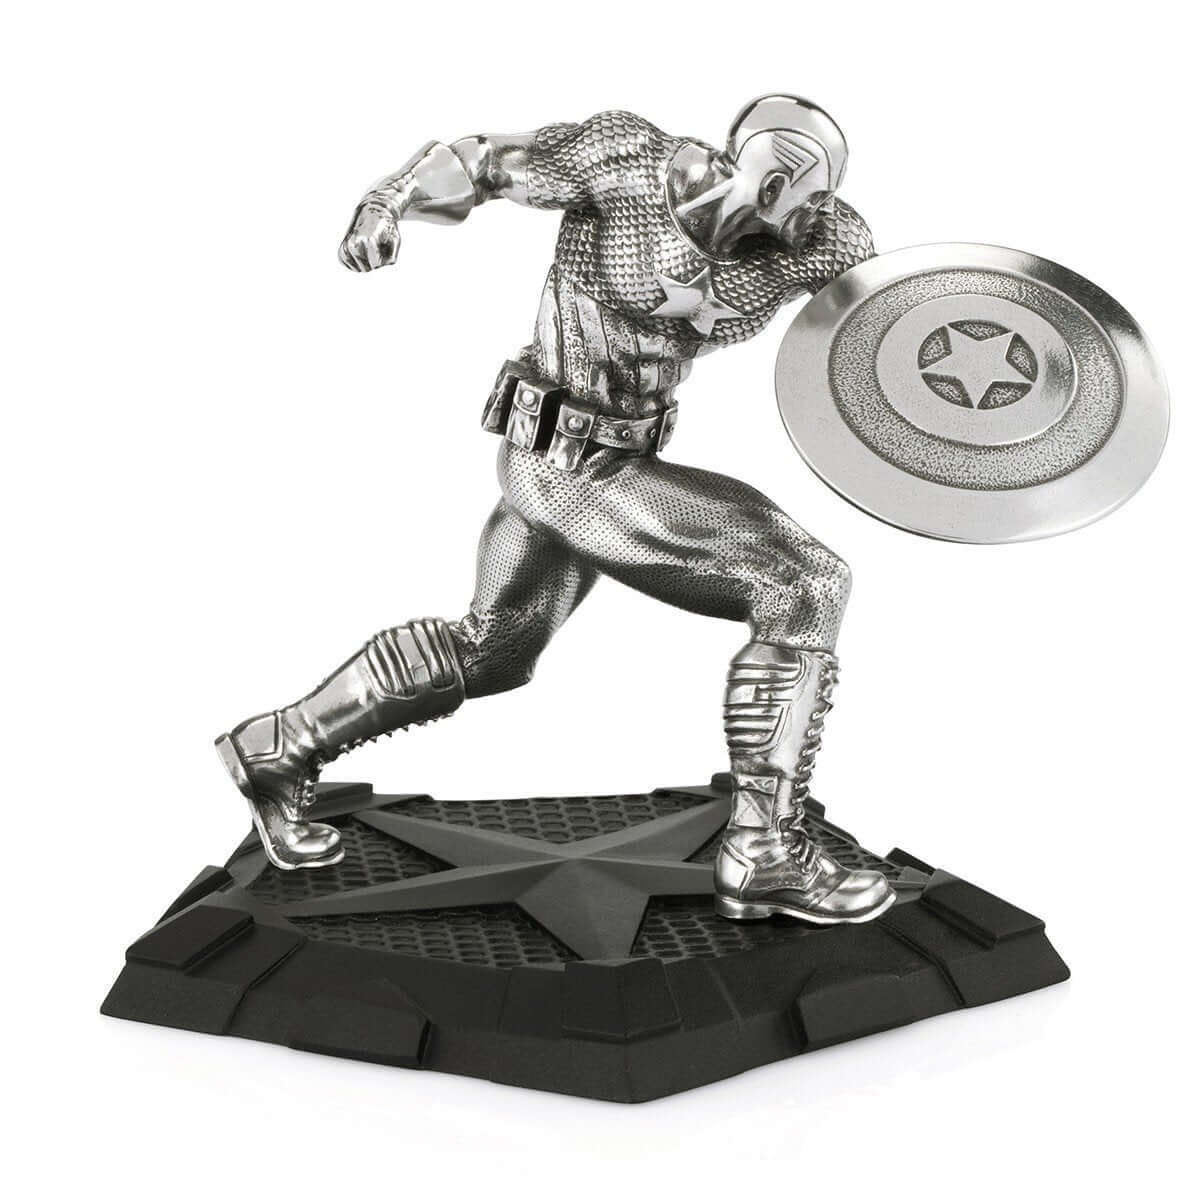 Captain America First Avenger Figurine - Marvel Collectible gift